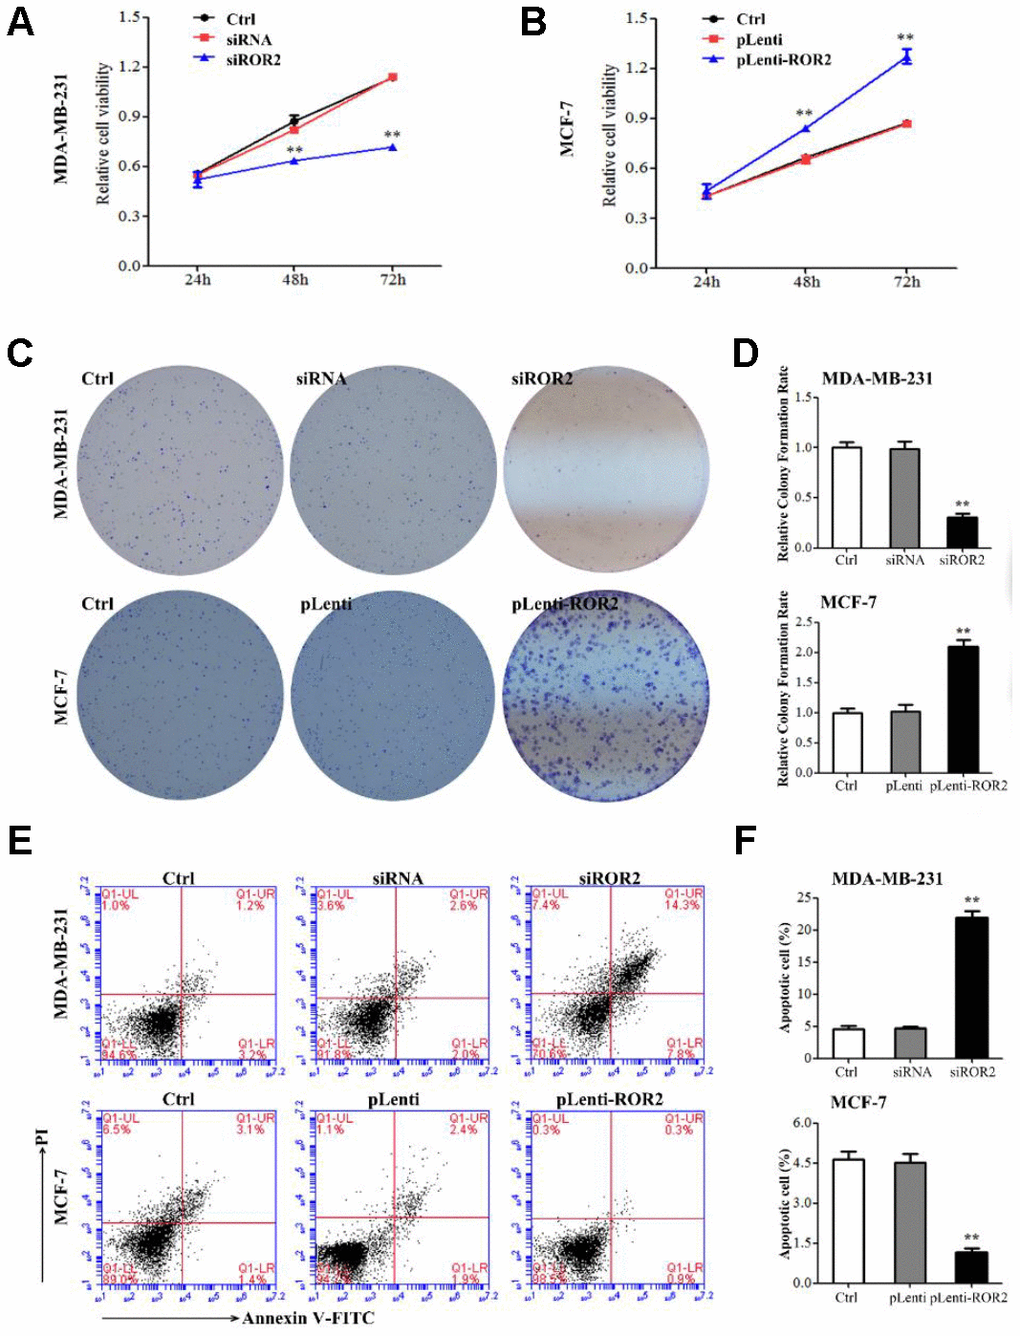 ROR2 promotes BC cell proliferation in vitro. (A, B) Cell proliferation analyzed by CCK-8 assay in MDA-MB-231 (A) and MCF-7 (B) cells transfected with ROR2 siRNA and overexpression plasmids. (C, D) Colony formation assay of ROR2 effect on MDA-MB-231 and MCF-7 cell proliferation. (E, F) Flow cytometry analysis of apoptosis of MDA-MB-231 and MCF-7 cells after siROR2 and pLenti-ROR2 transfection. Results are shown as means ± SD; n=3; *p